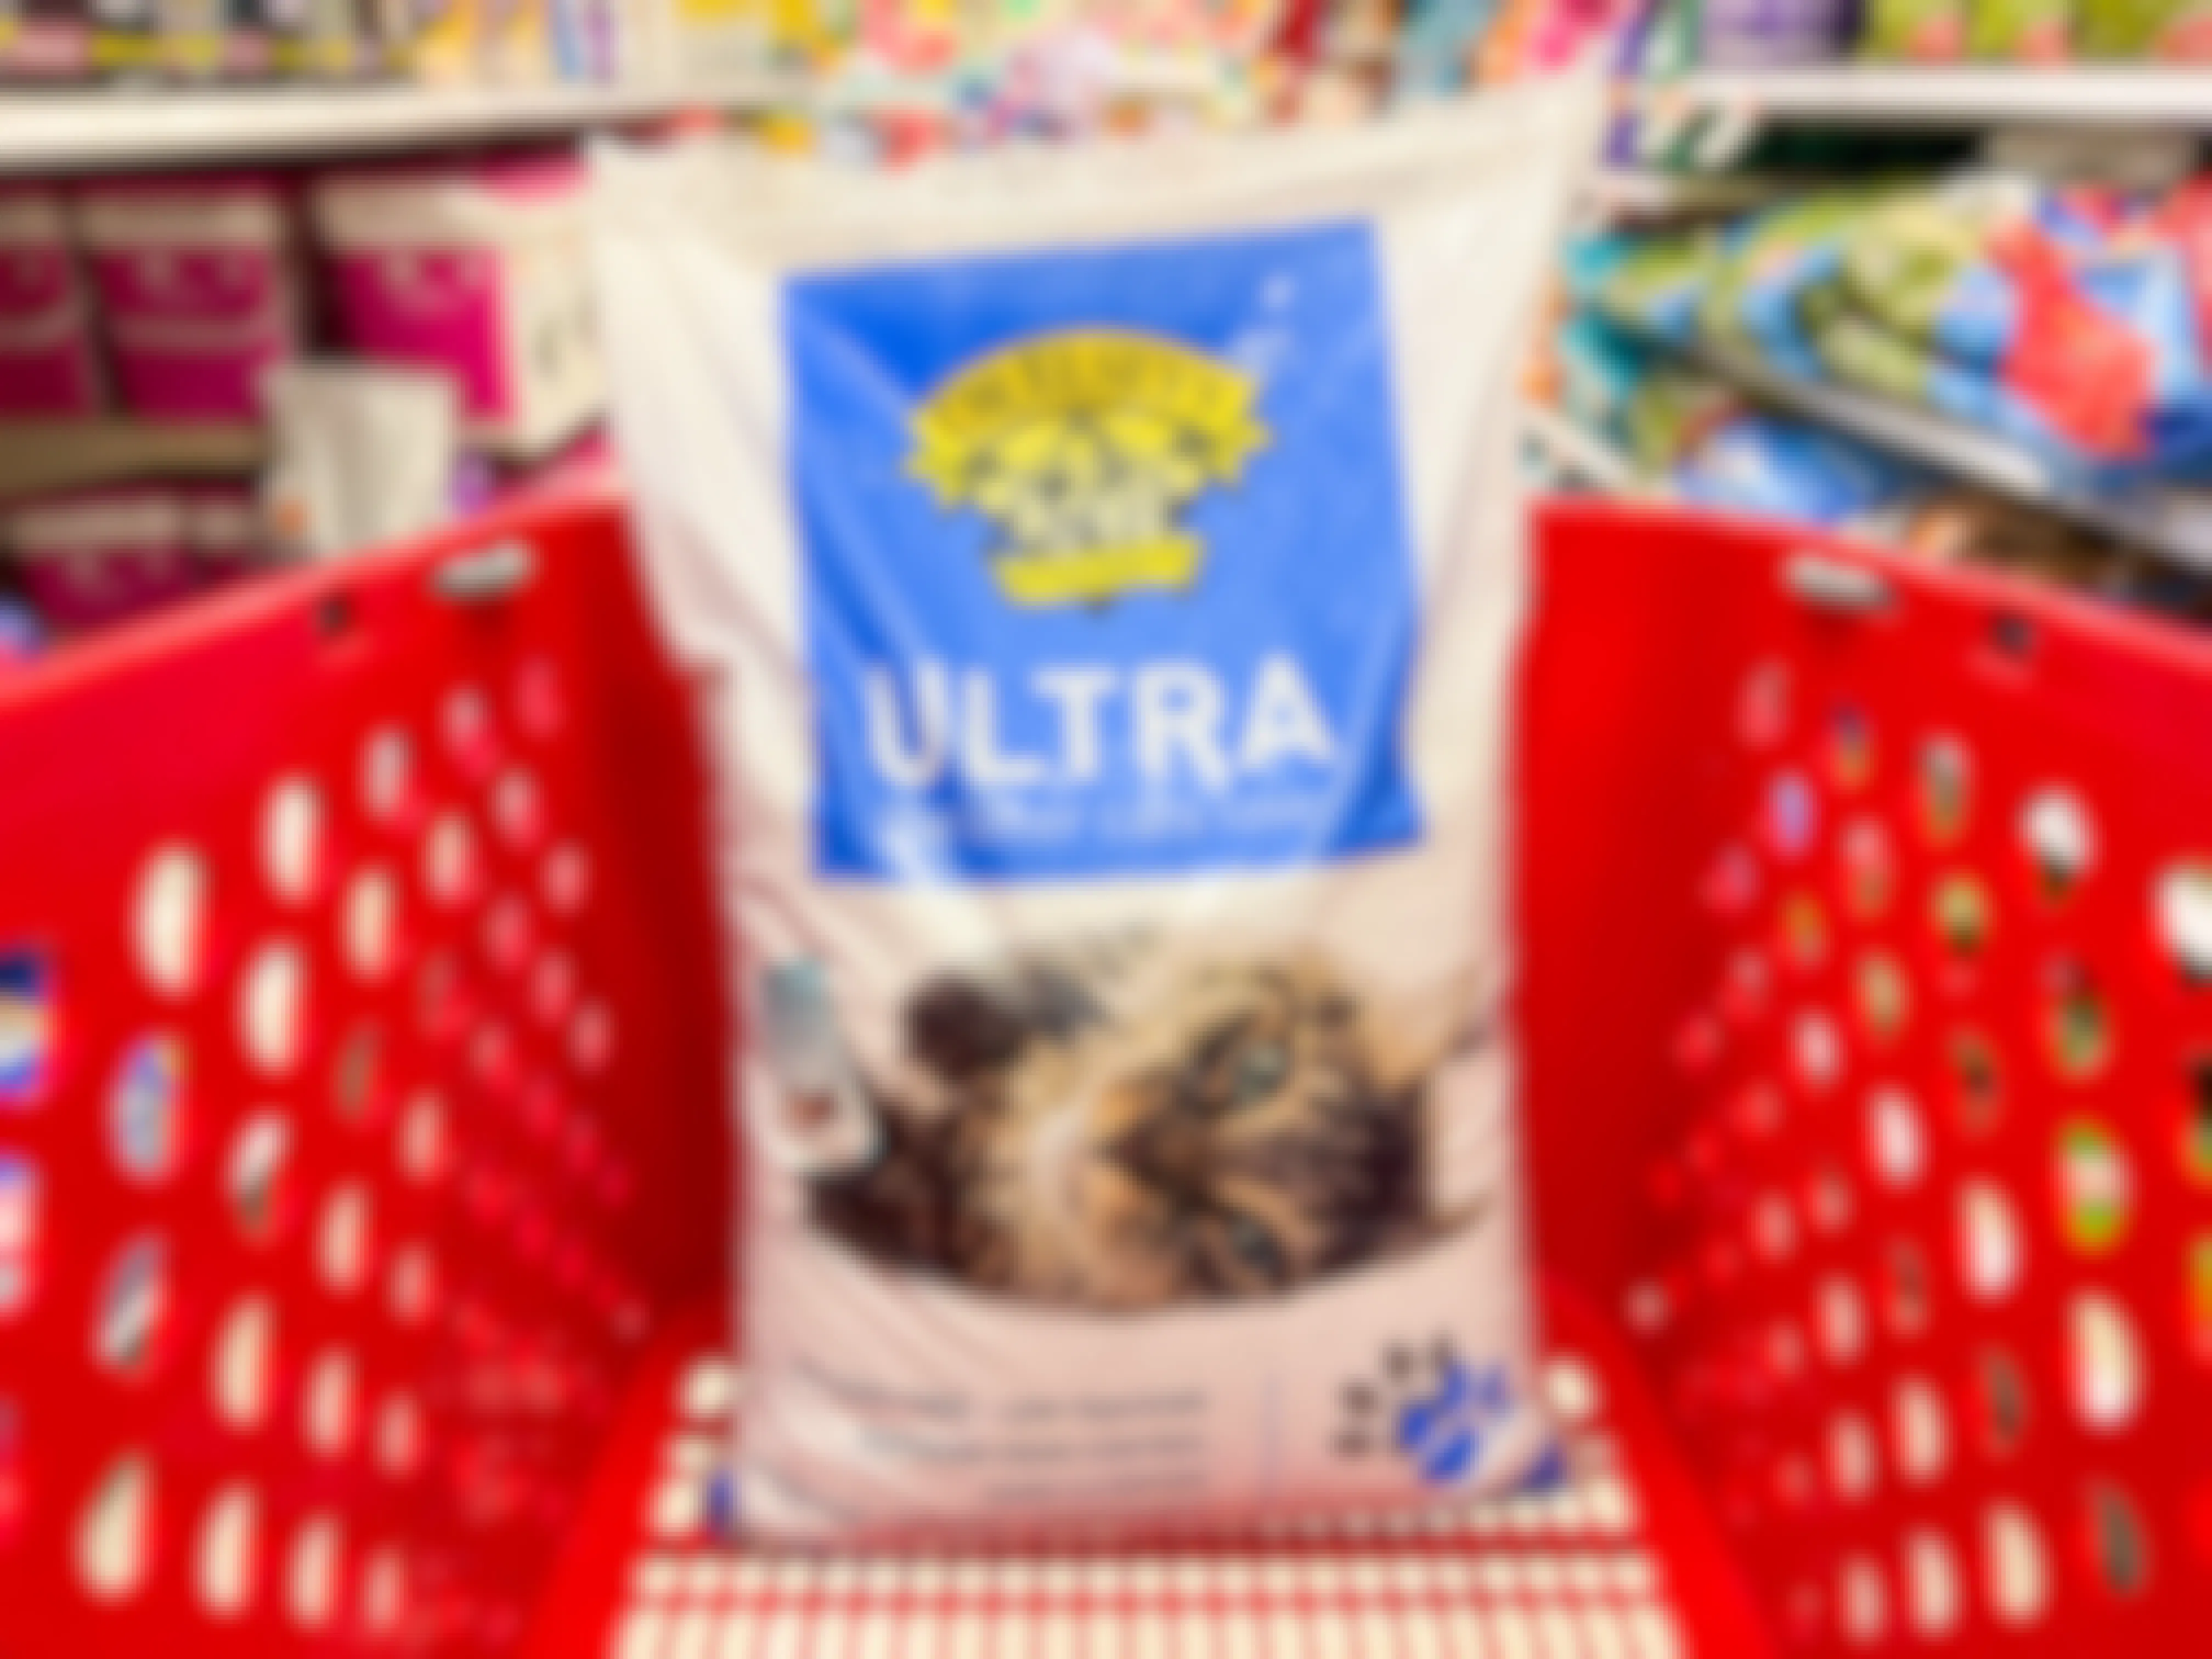 Dr. Elsey's 35-Pound Cat Litter, Free at Target or Walmart